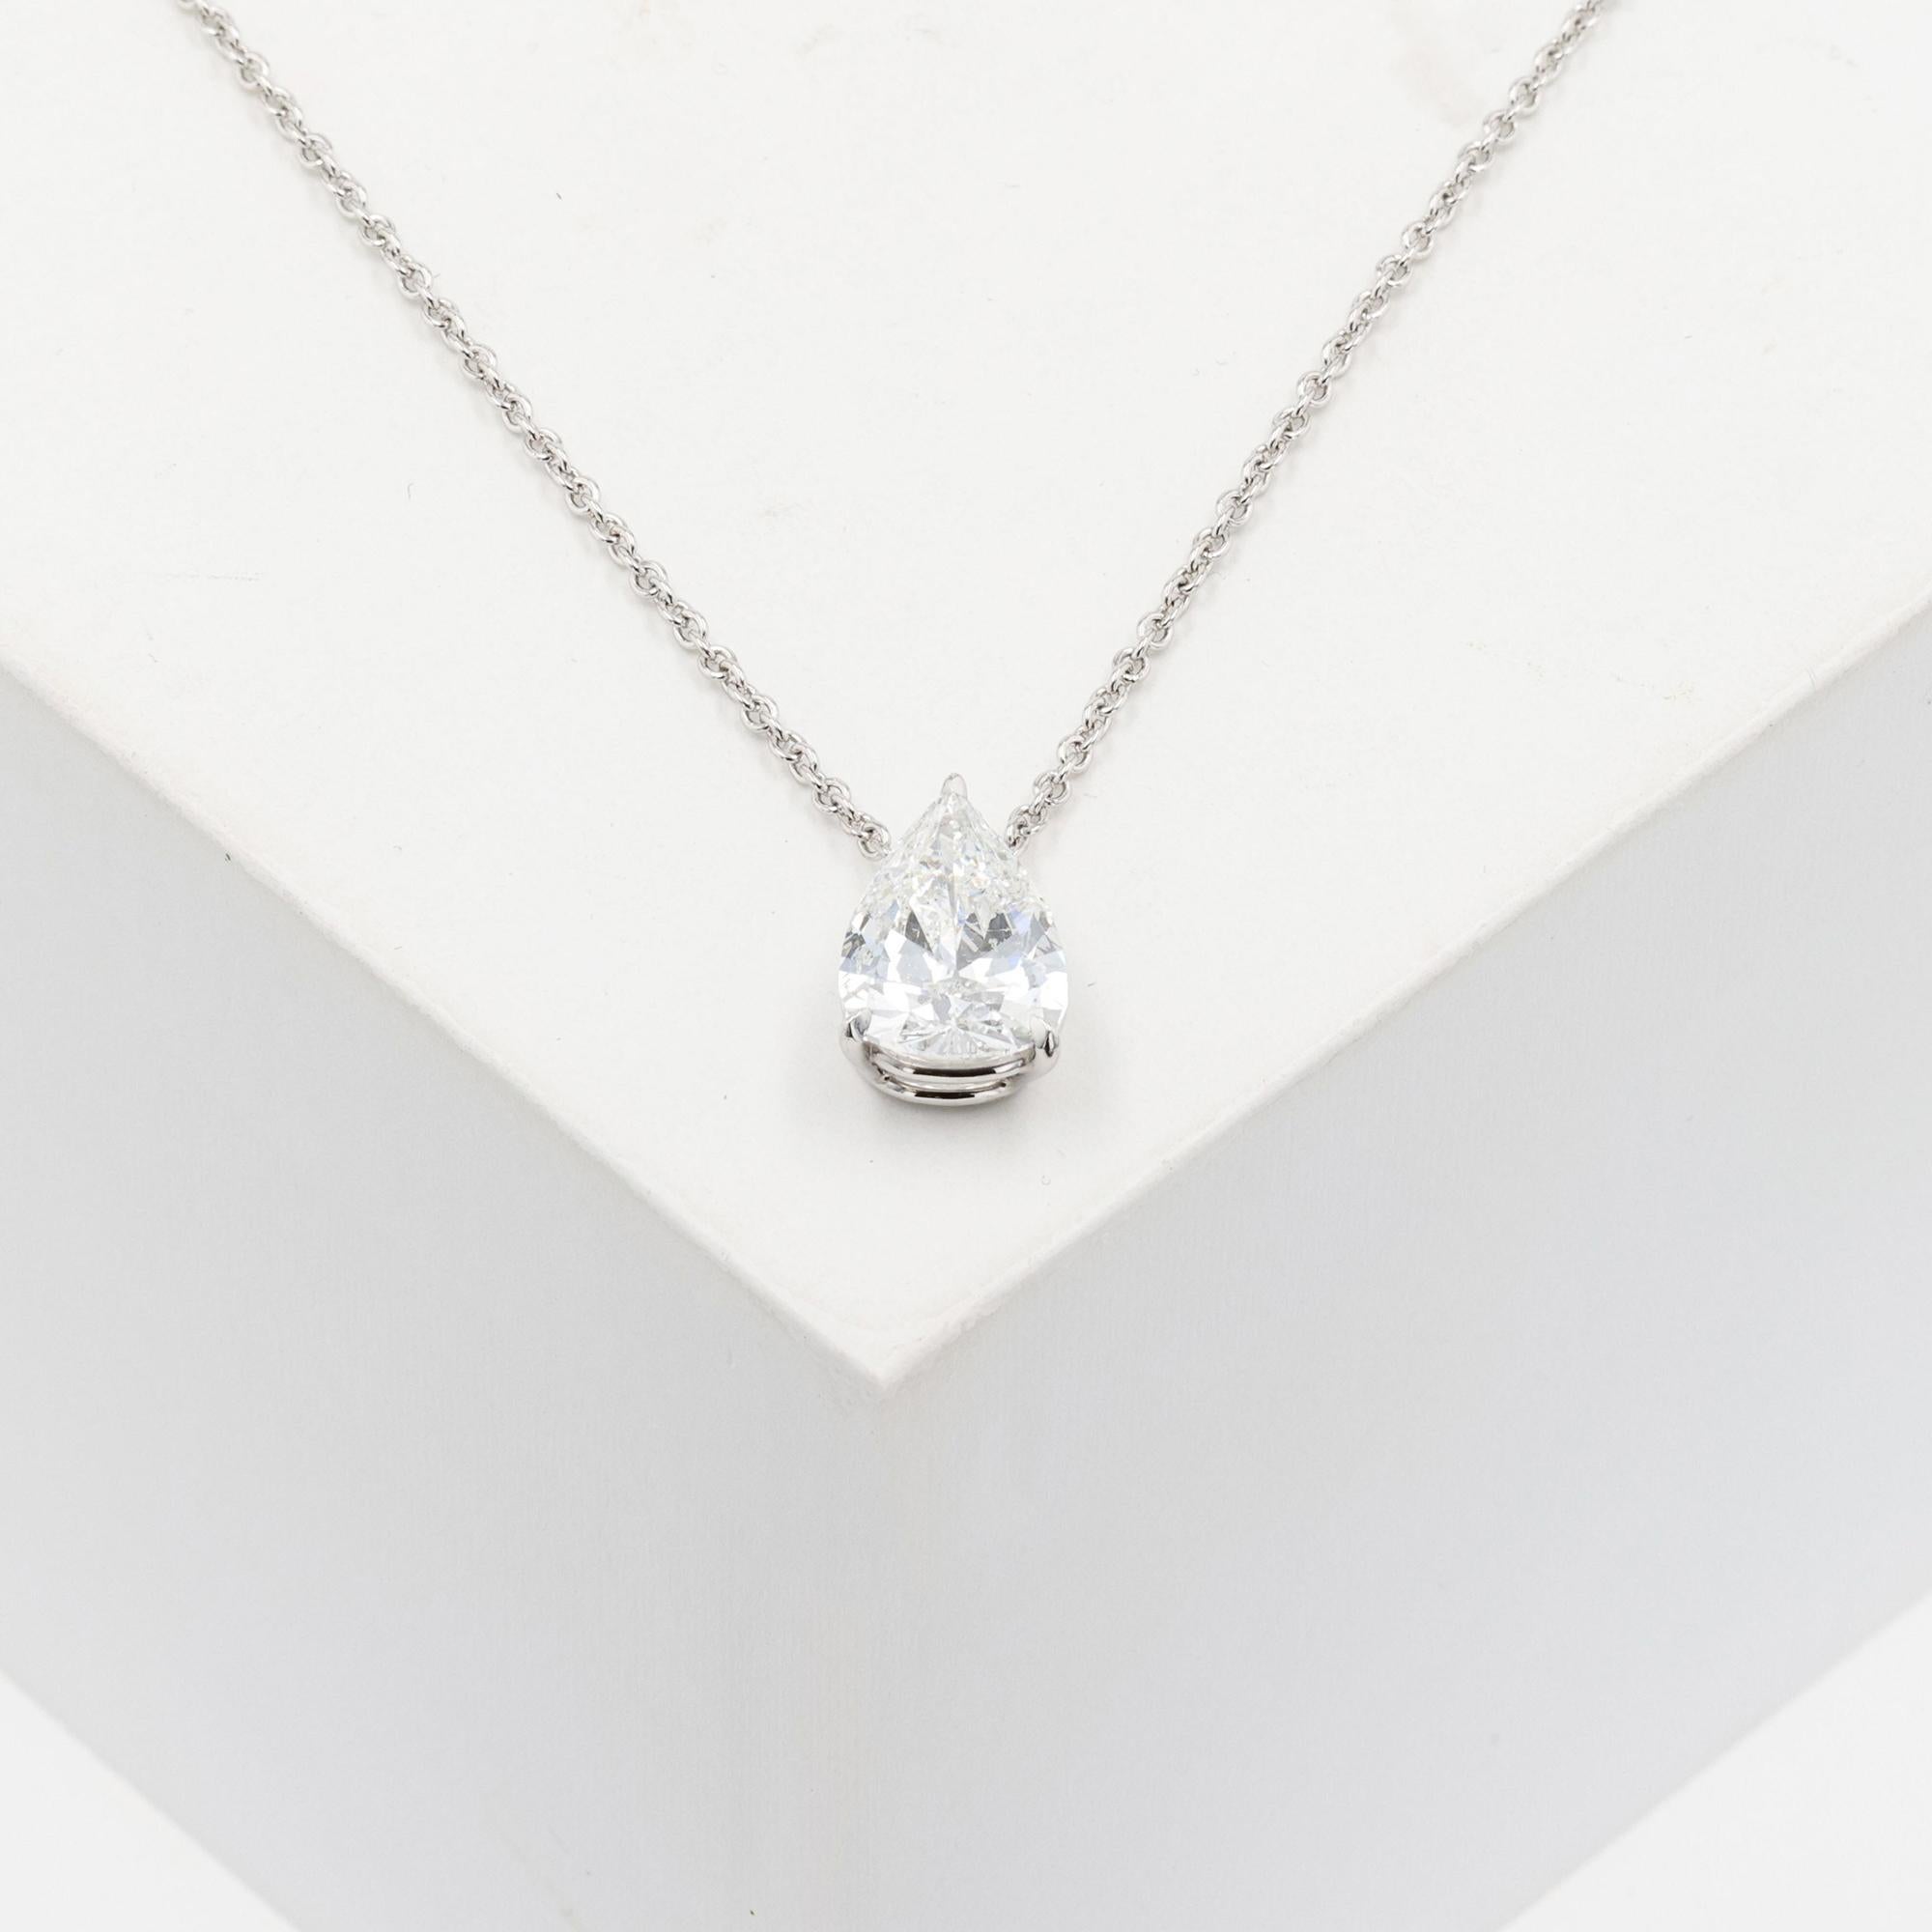 Vintage platinum diamond solitaire pendant. The pear shape diamond weighs 3.39ct.
The diamond is E in color and I1 in clarity. The polish and symmetry are graded
as good. The GIA number is 2221558959, not inscribed. There is a laser drill hole. The